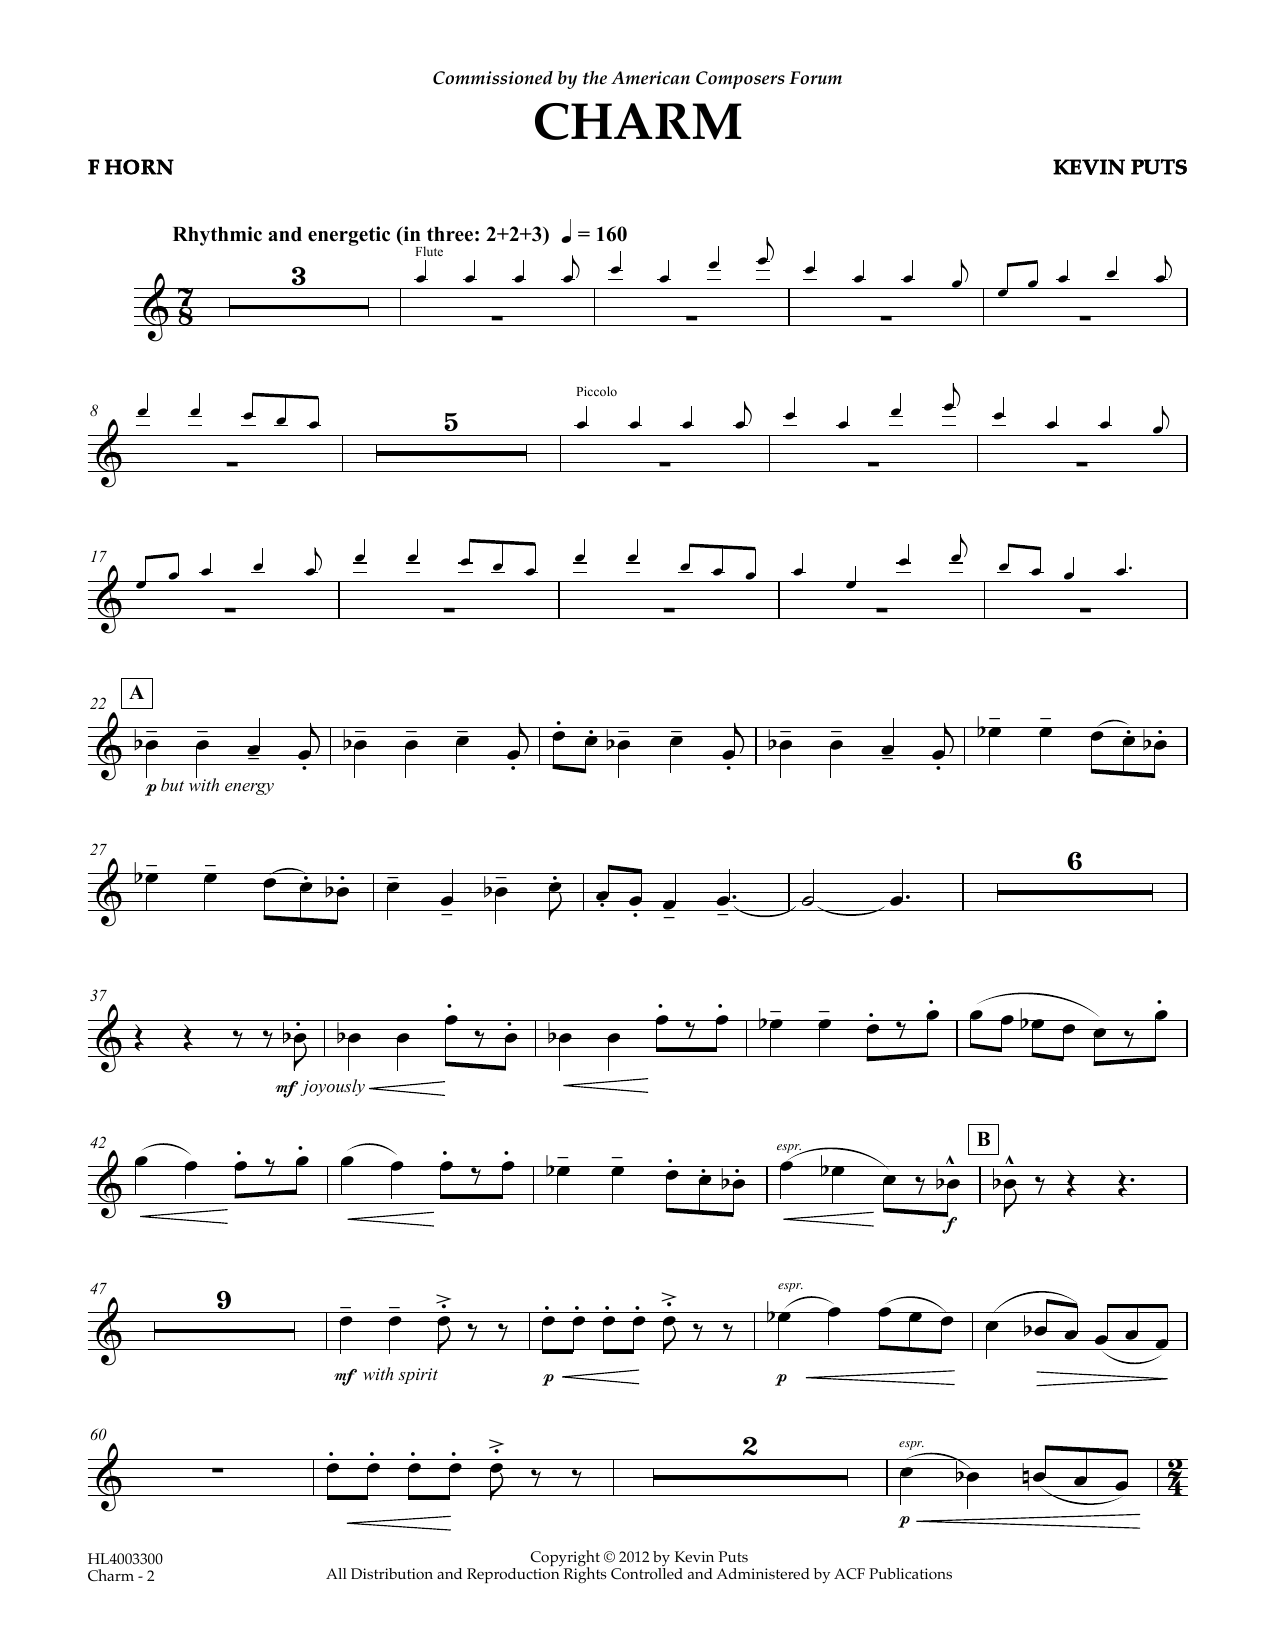 Download Kevin Puts Charm - FRENCH HORN Sheet Music